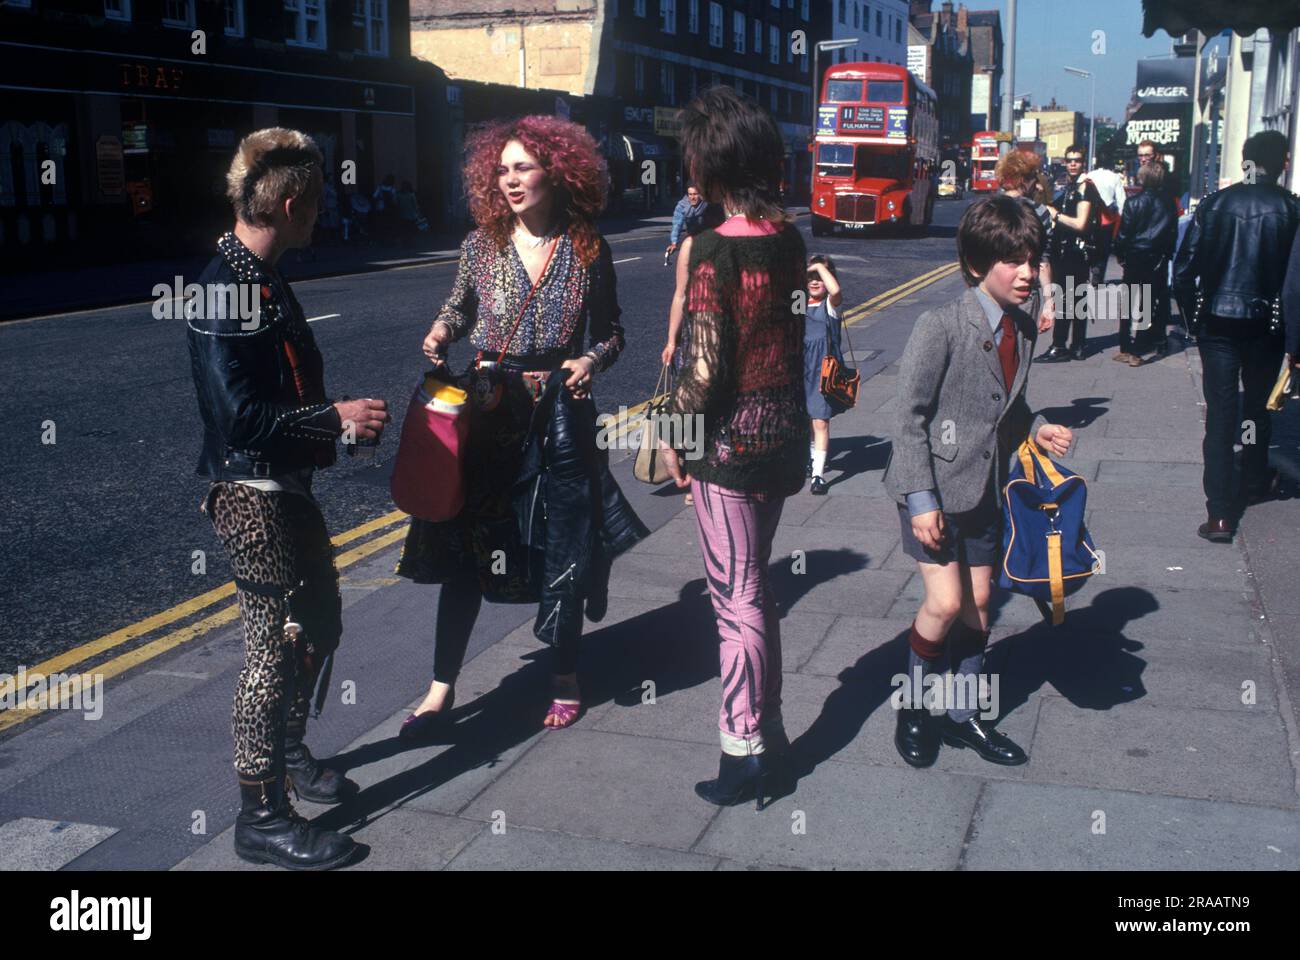 1970s Punks teenage fashion Chelsea, London. The Kings Road, Chelsea, Saturday morning three punks stop and chat, a young school boy in his school uniform walks by. England 1979. UK HOMER SYKES Stock Photo